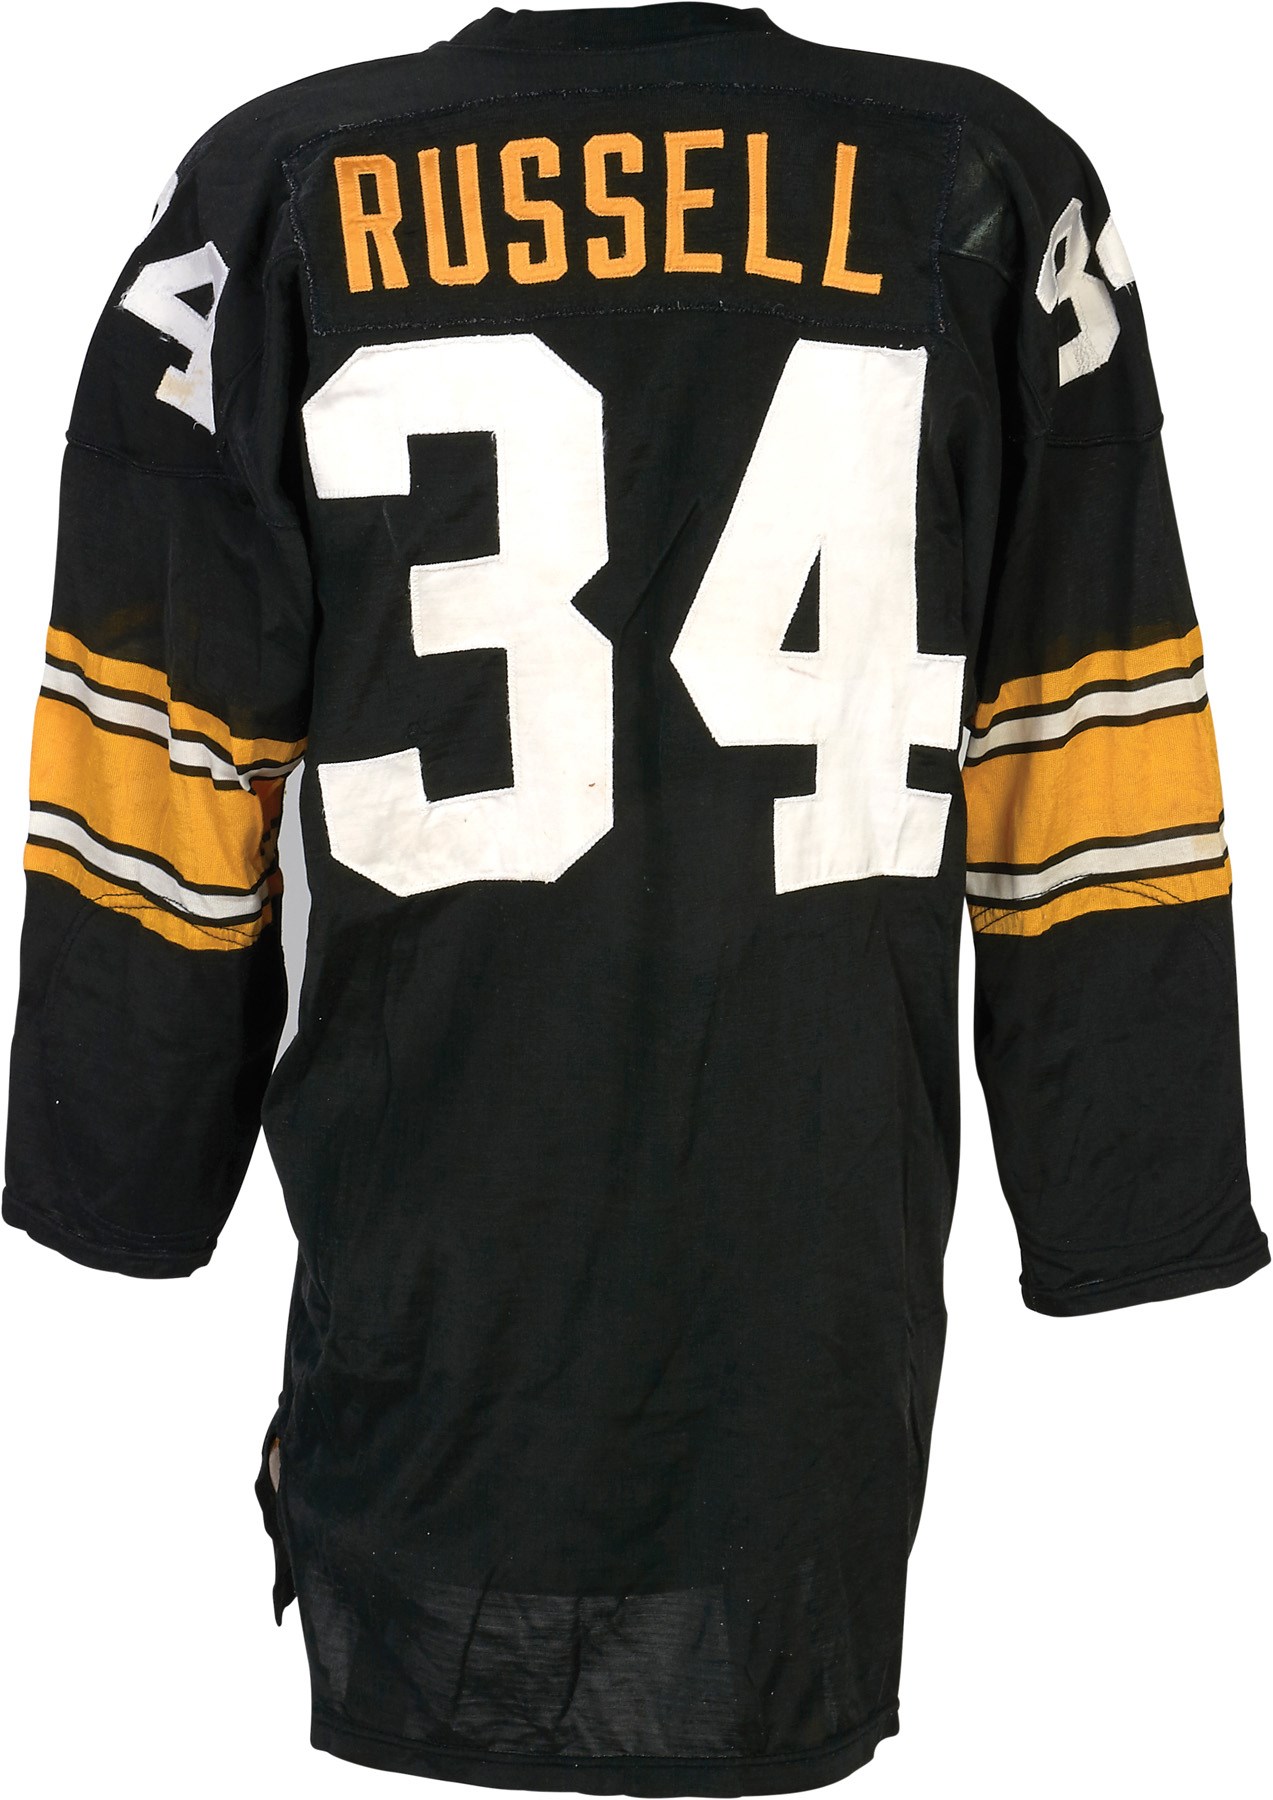 The Pittsburgh Steelers Game Worn Jersey Archive - 1974 Andy Russell Pittsburgh Steelers Game Worn Jersey (Photo-Matched)